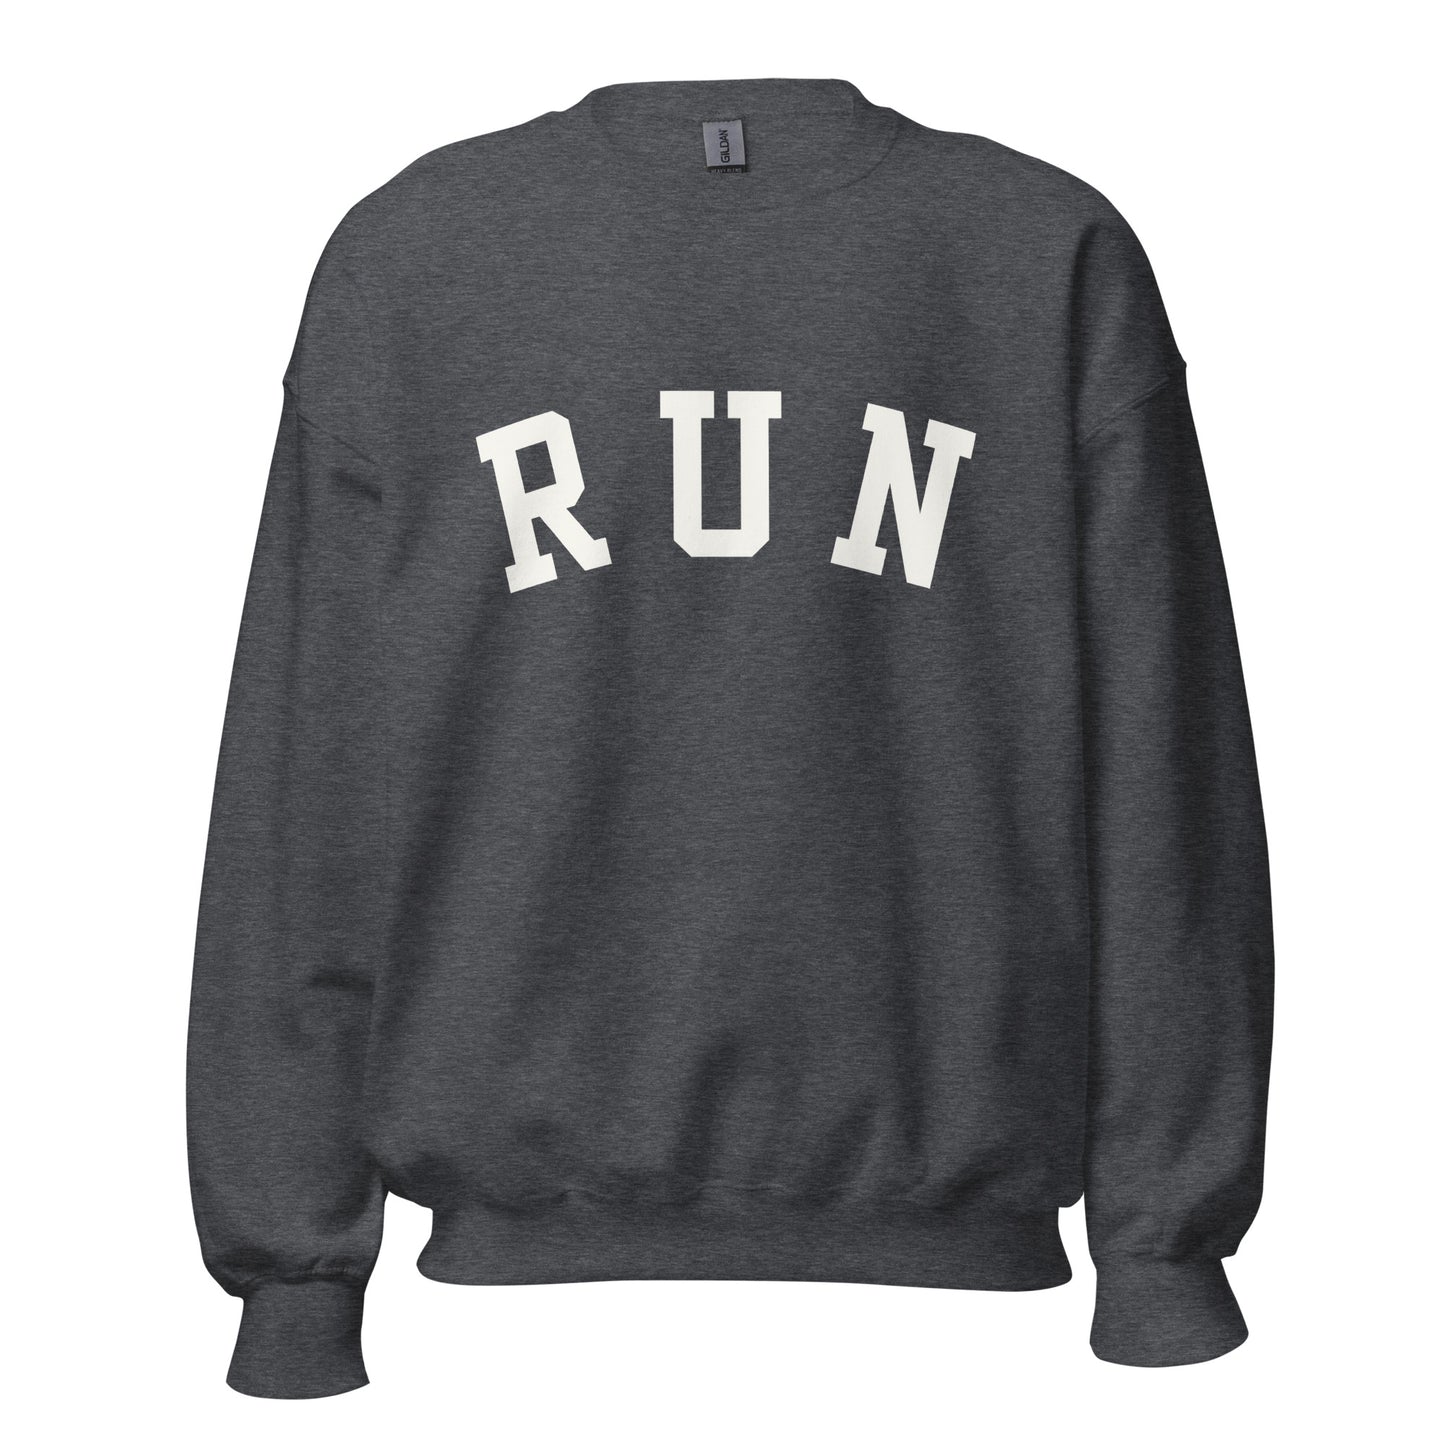 dark grey unisex sweatshirt with the word run across the chest in a bold varsity style font